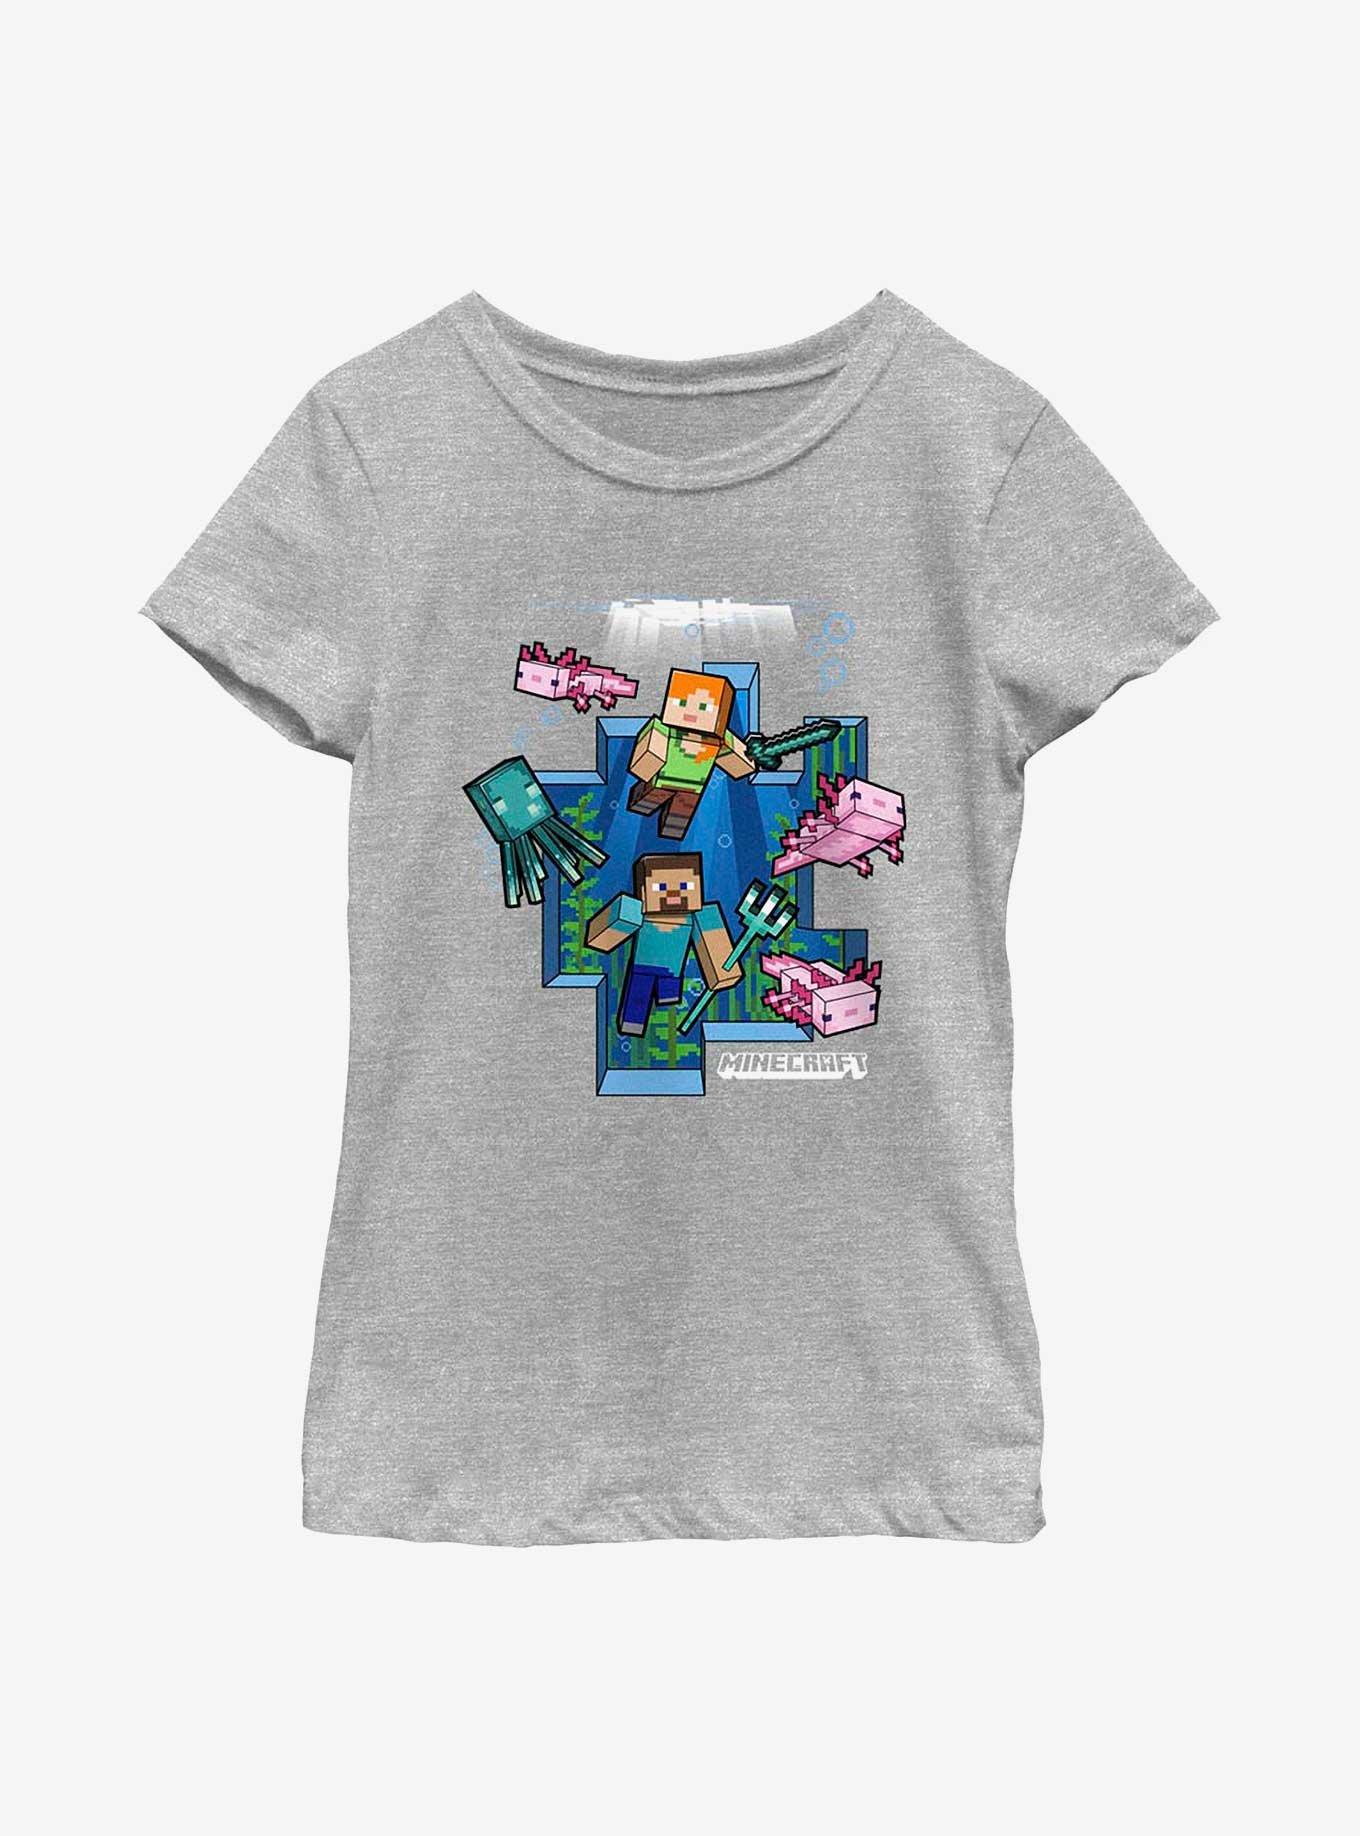 Minecraft Under Water Youth Girls T-Shirt, ATH HTR, hi-res